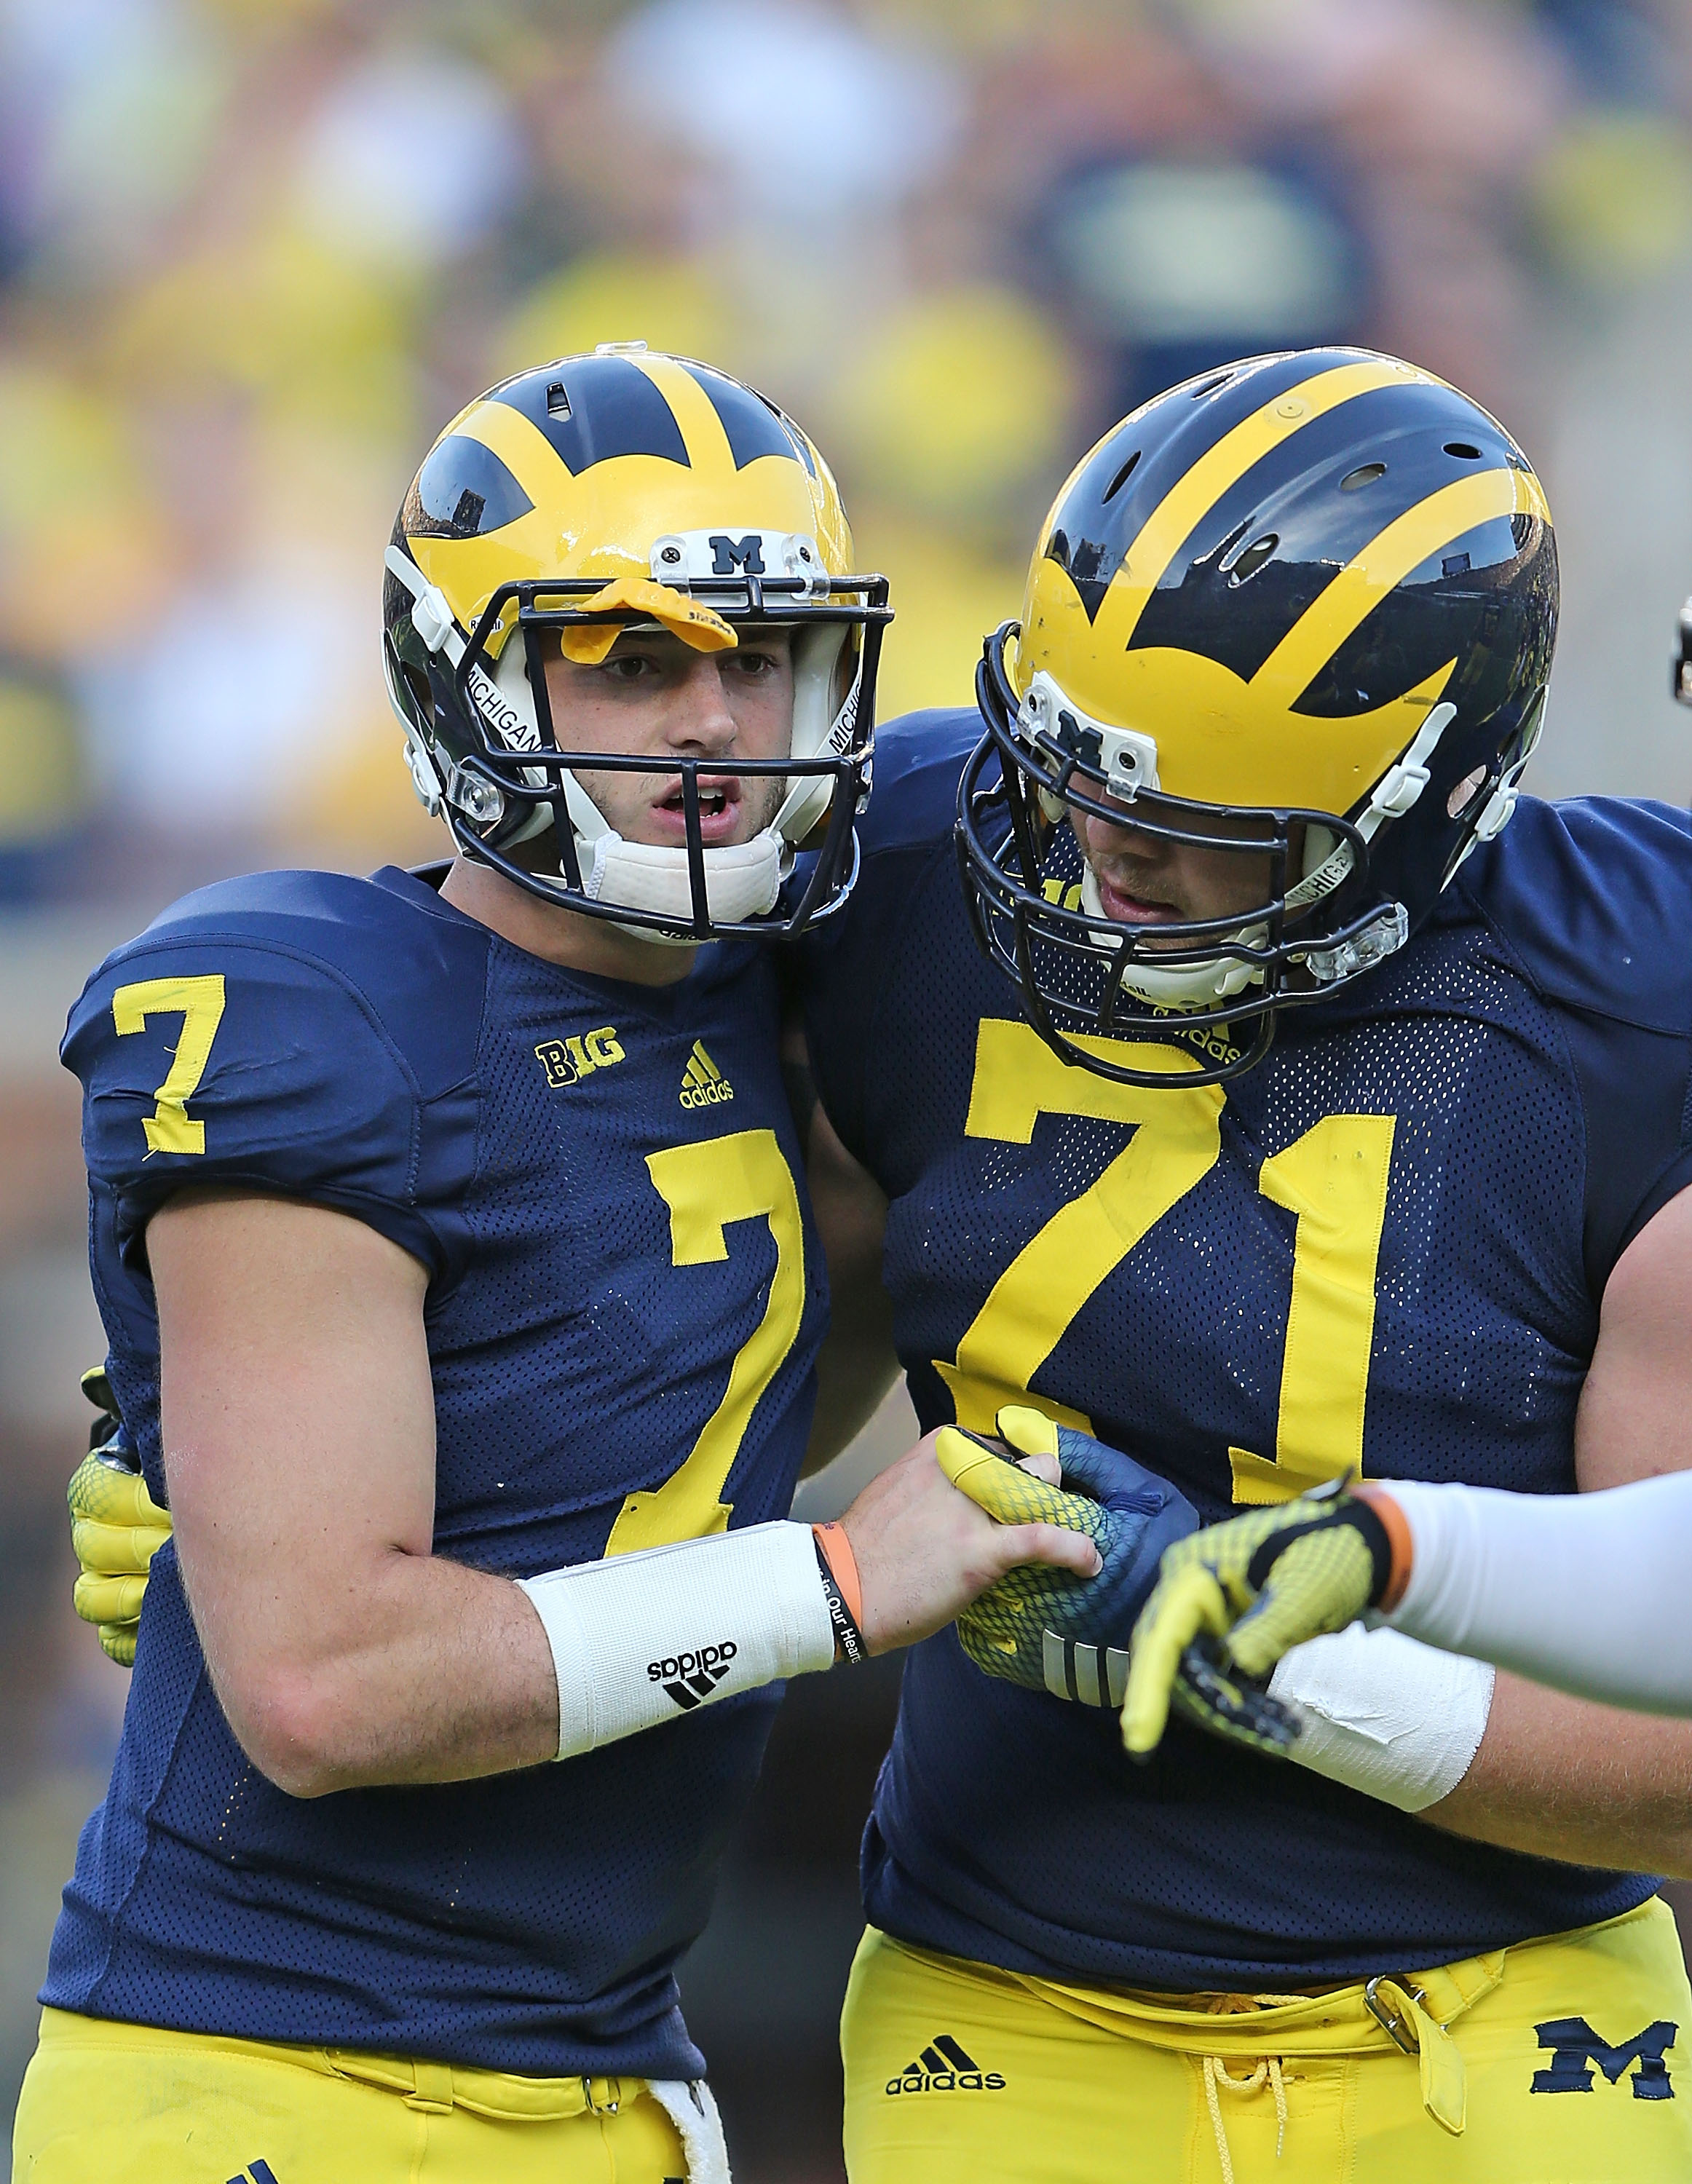 Quarterback Shane Morris (#7) of the Michigan Wolverines is helped off the field by Ben Braden (#71) during the fourth quarter of the game against the Minnesota Golden Gophers on Sept. 27, 2014, at Michigan Stadium in Ann Arbor, Mich. (Leon Halip&mdash;Getty Images)